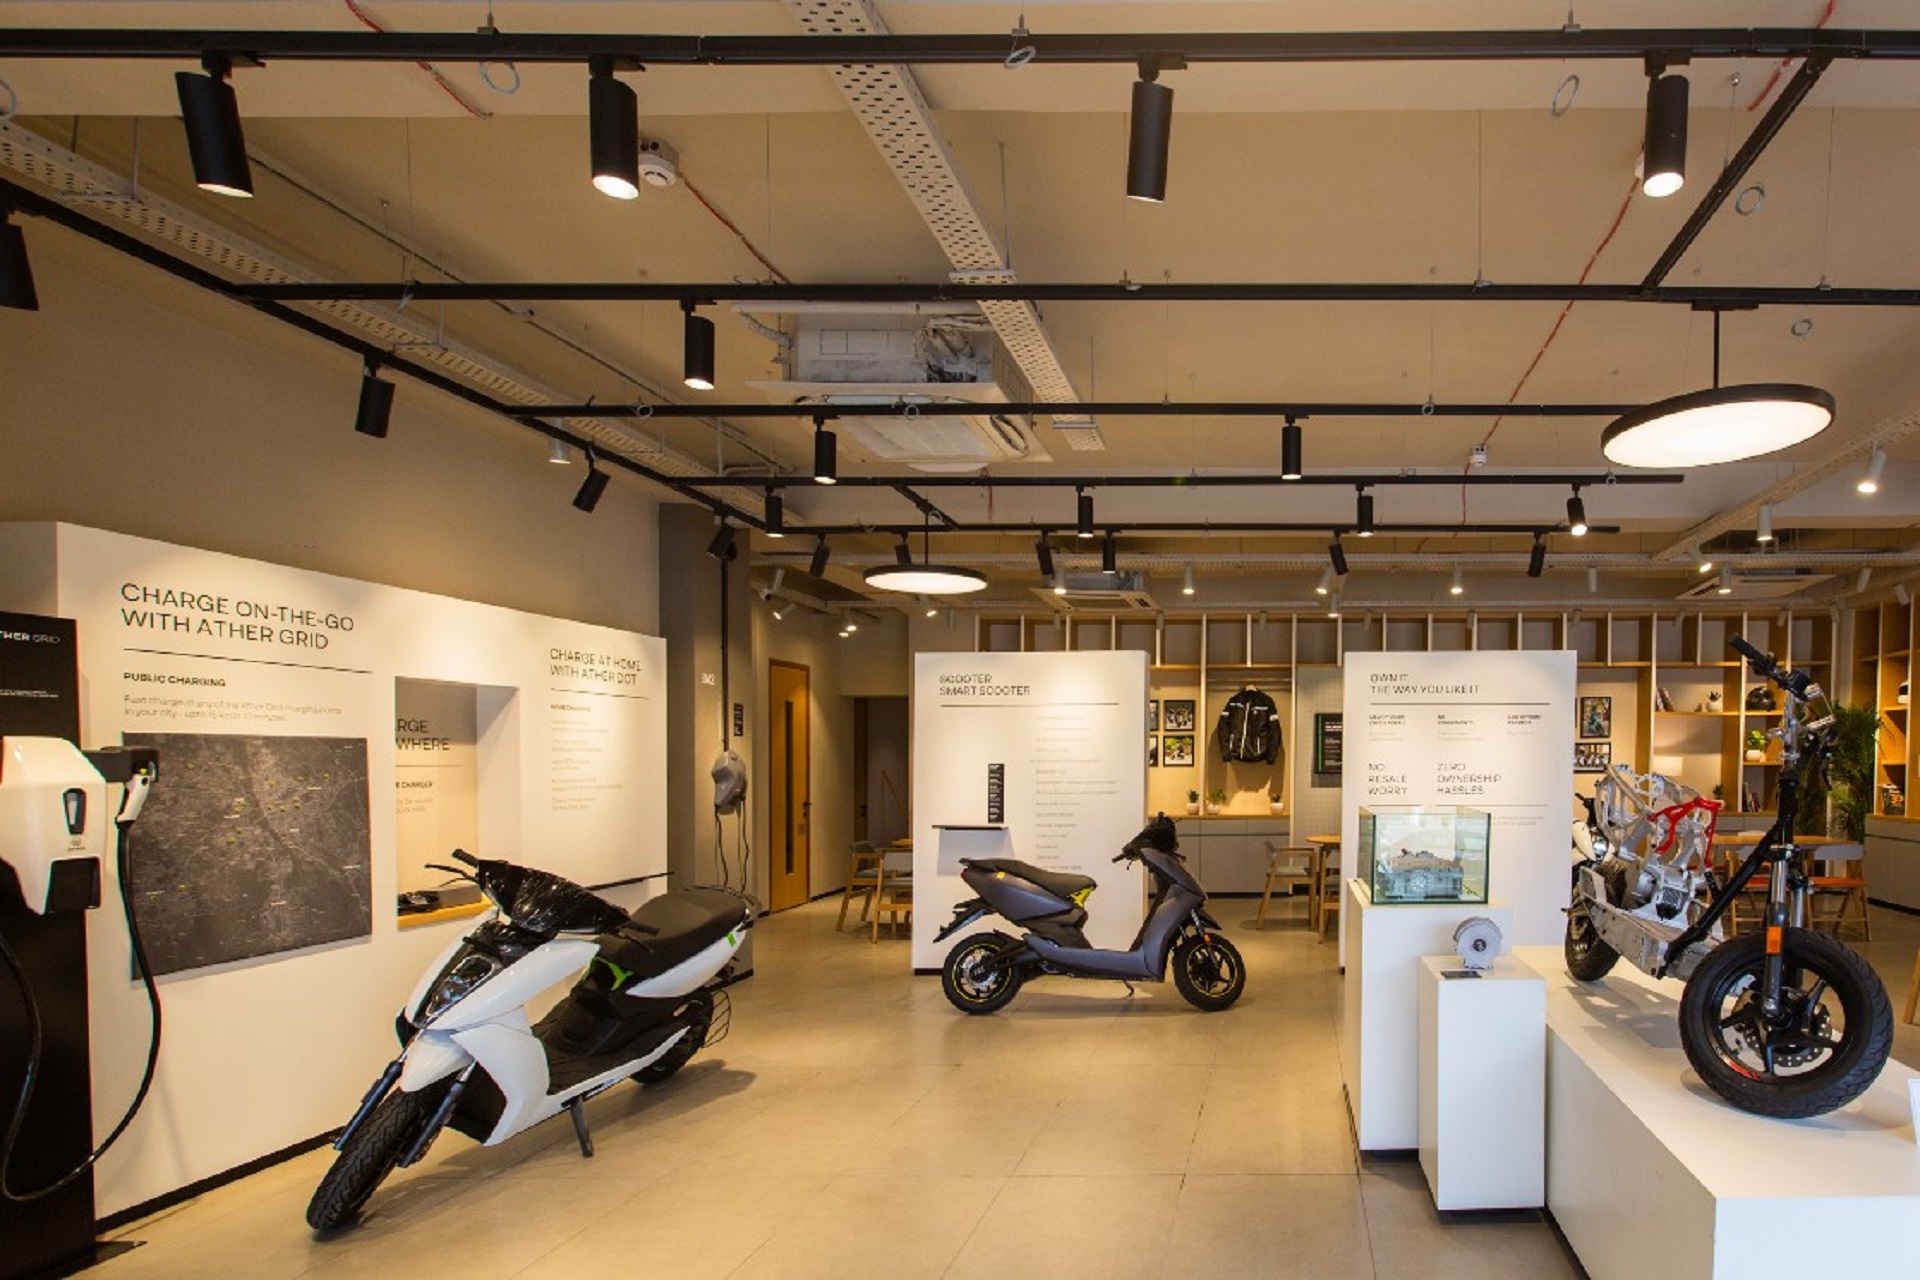 Ather Electric Scooter Production To Increase From 1.2 L to 4 L